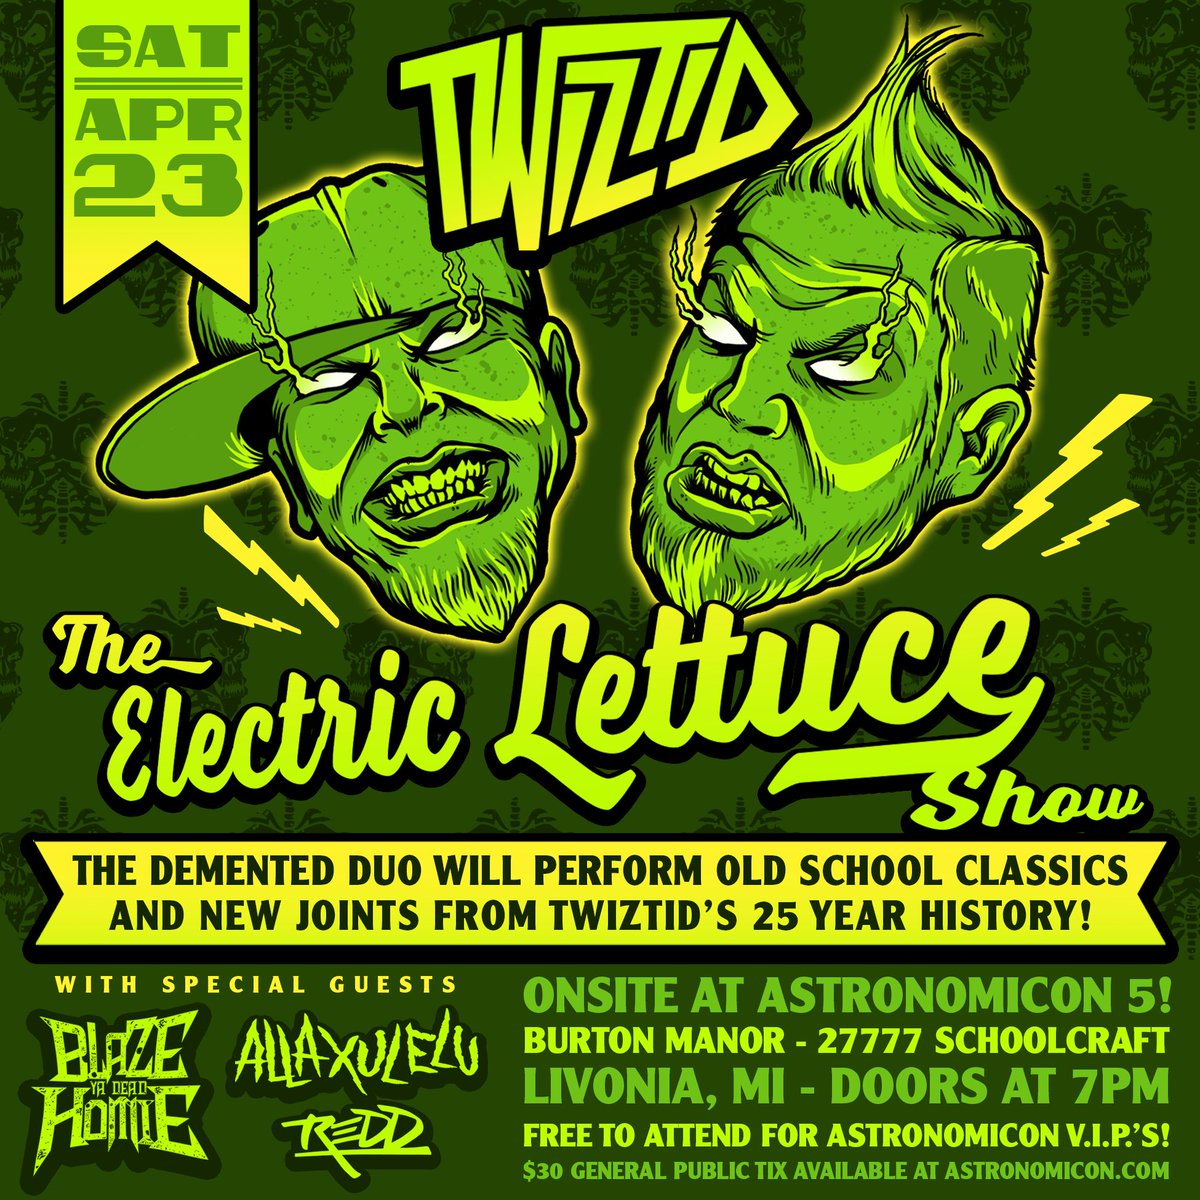 The Electric Lettuce Show goes down Saturday April 23rd on site @AstronomiconMI 5 🚀 Catch @tweetmesohard performing old school and new tracks 💨 With special guests @blazeyadead1 , @allaxulelu and @rapperredd !!! Grab your tickets at astronomicon.com